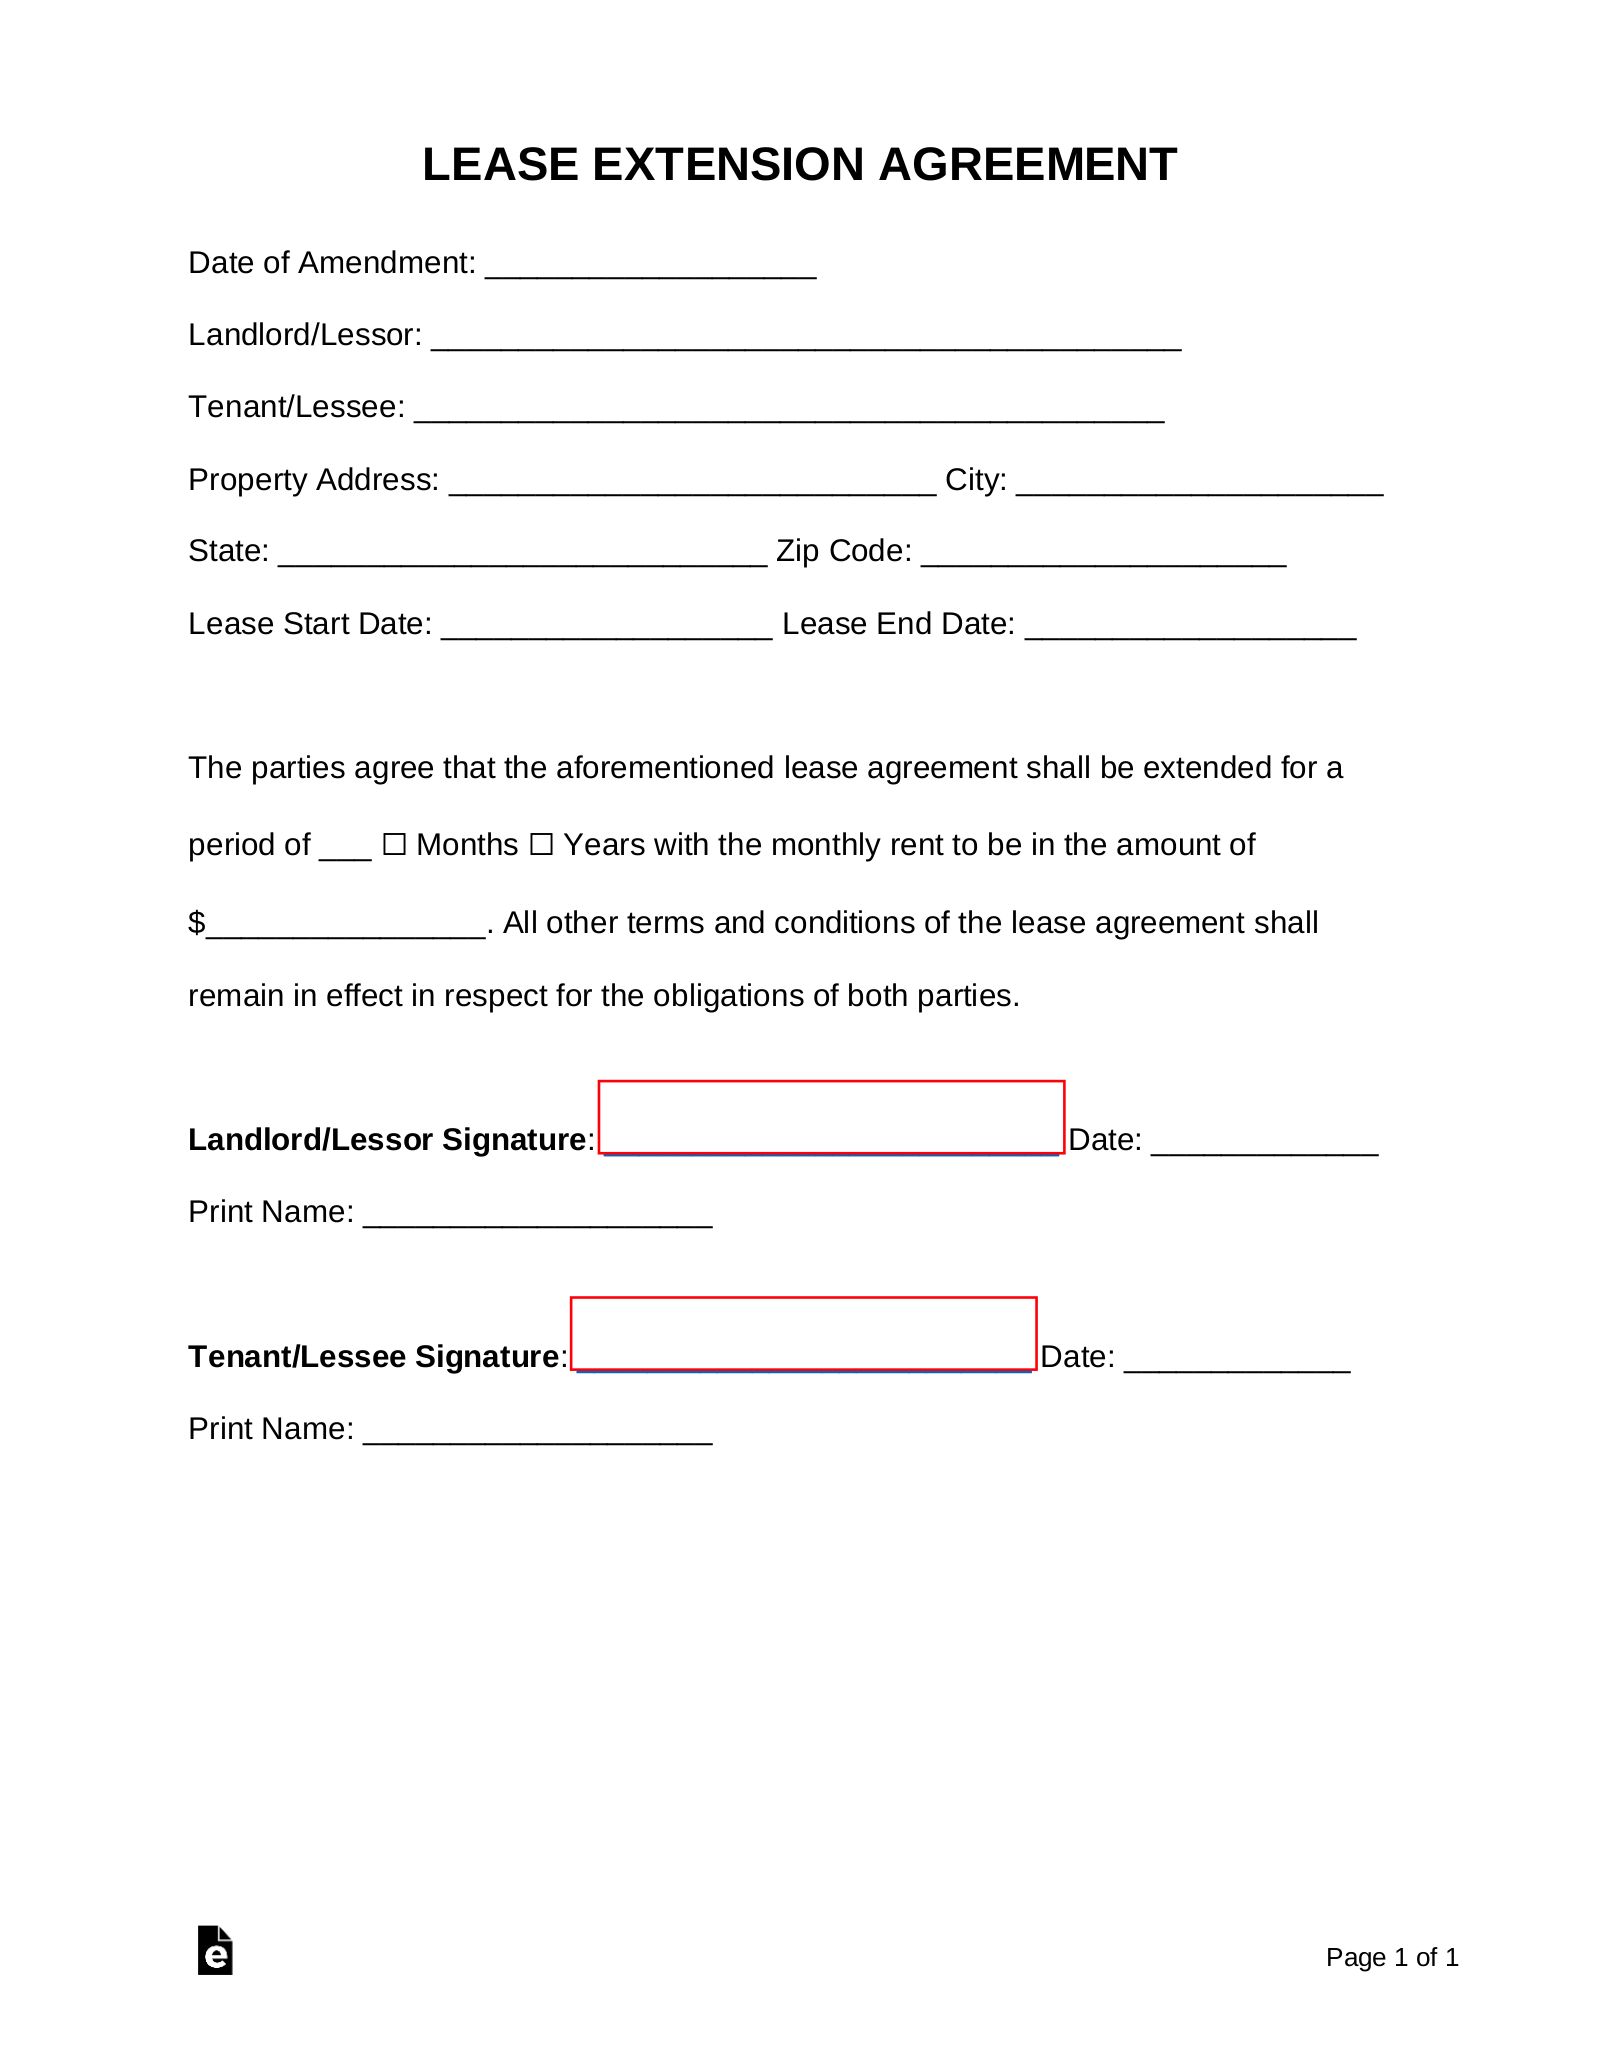 Free Lease Extension Agreement Residential & Commercial PDF Word